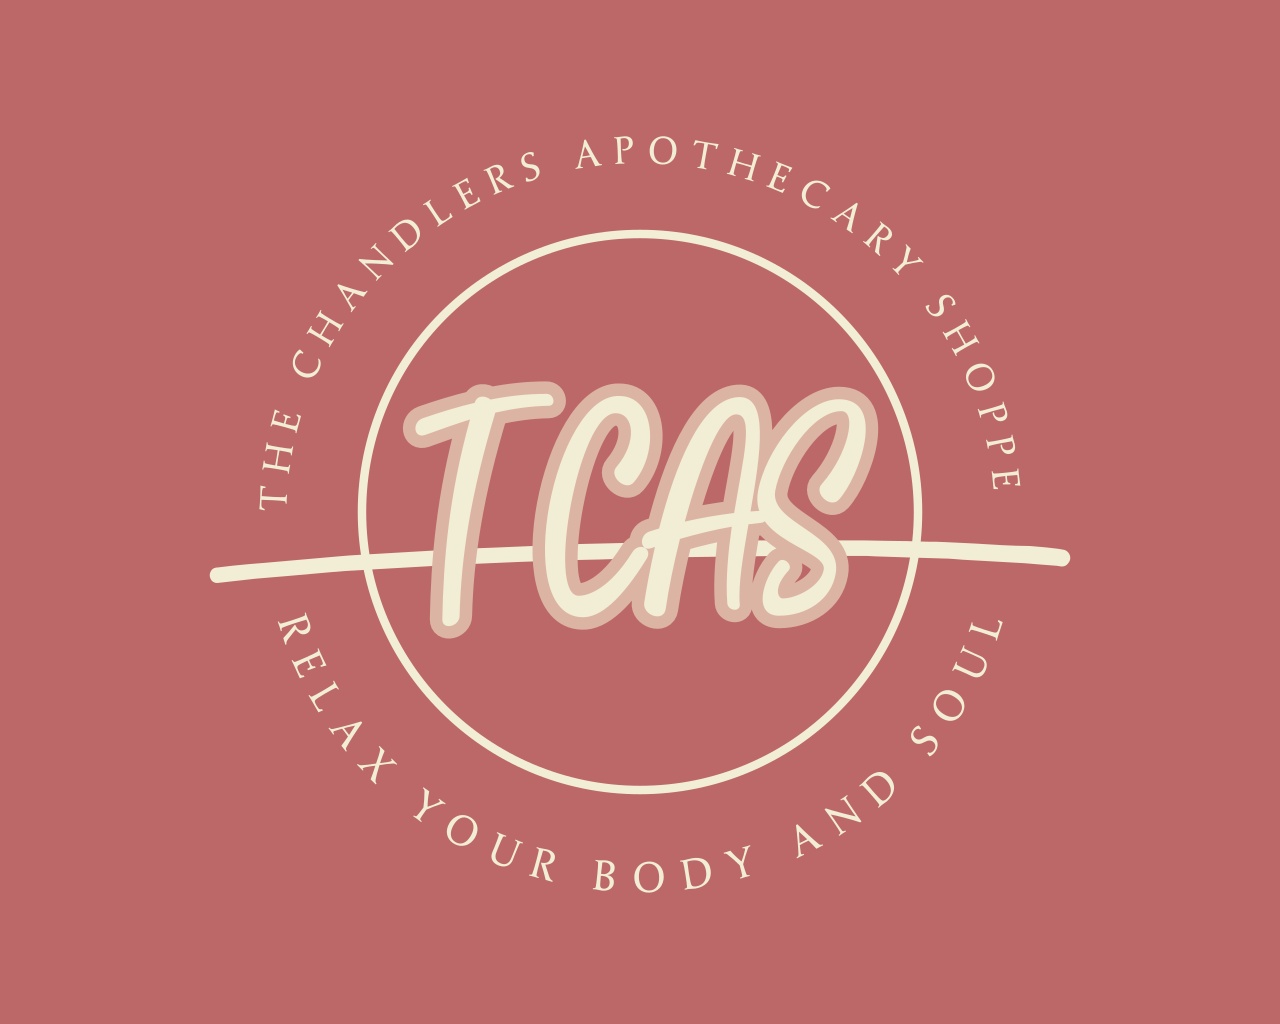 The Chandlers Apothecary Shoppe's logo